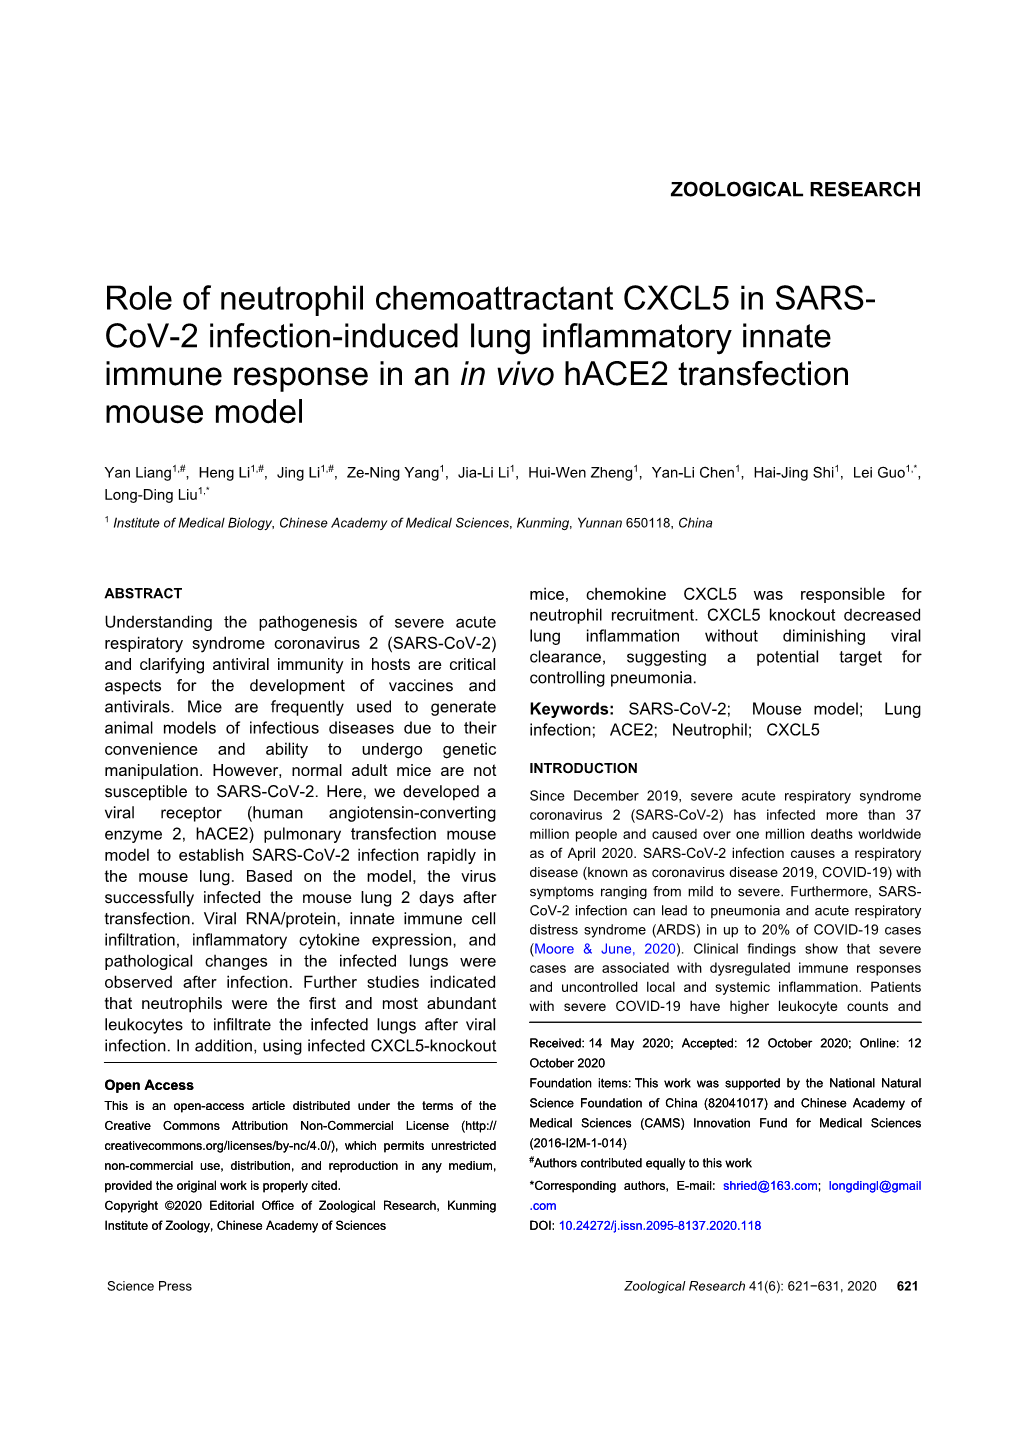 Role of Neutrophil Chemoattractant CXCL5 in SARS- Cov-2 Infection-Induced Lung Inflammatory Innate Immune Response in an in Vivo Hace2 Transfection Mouse Model